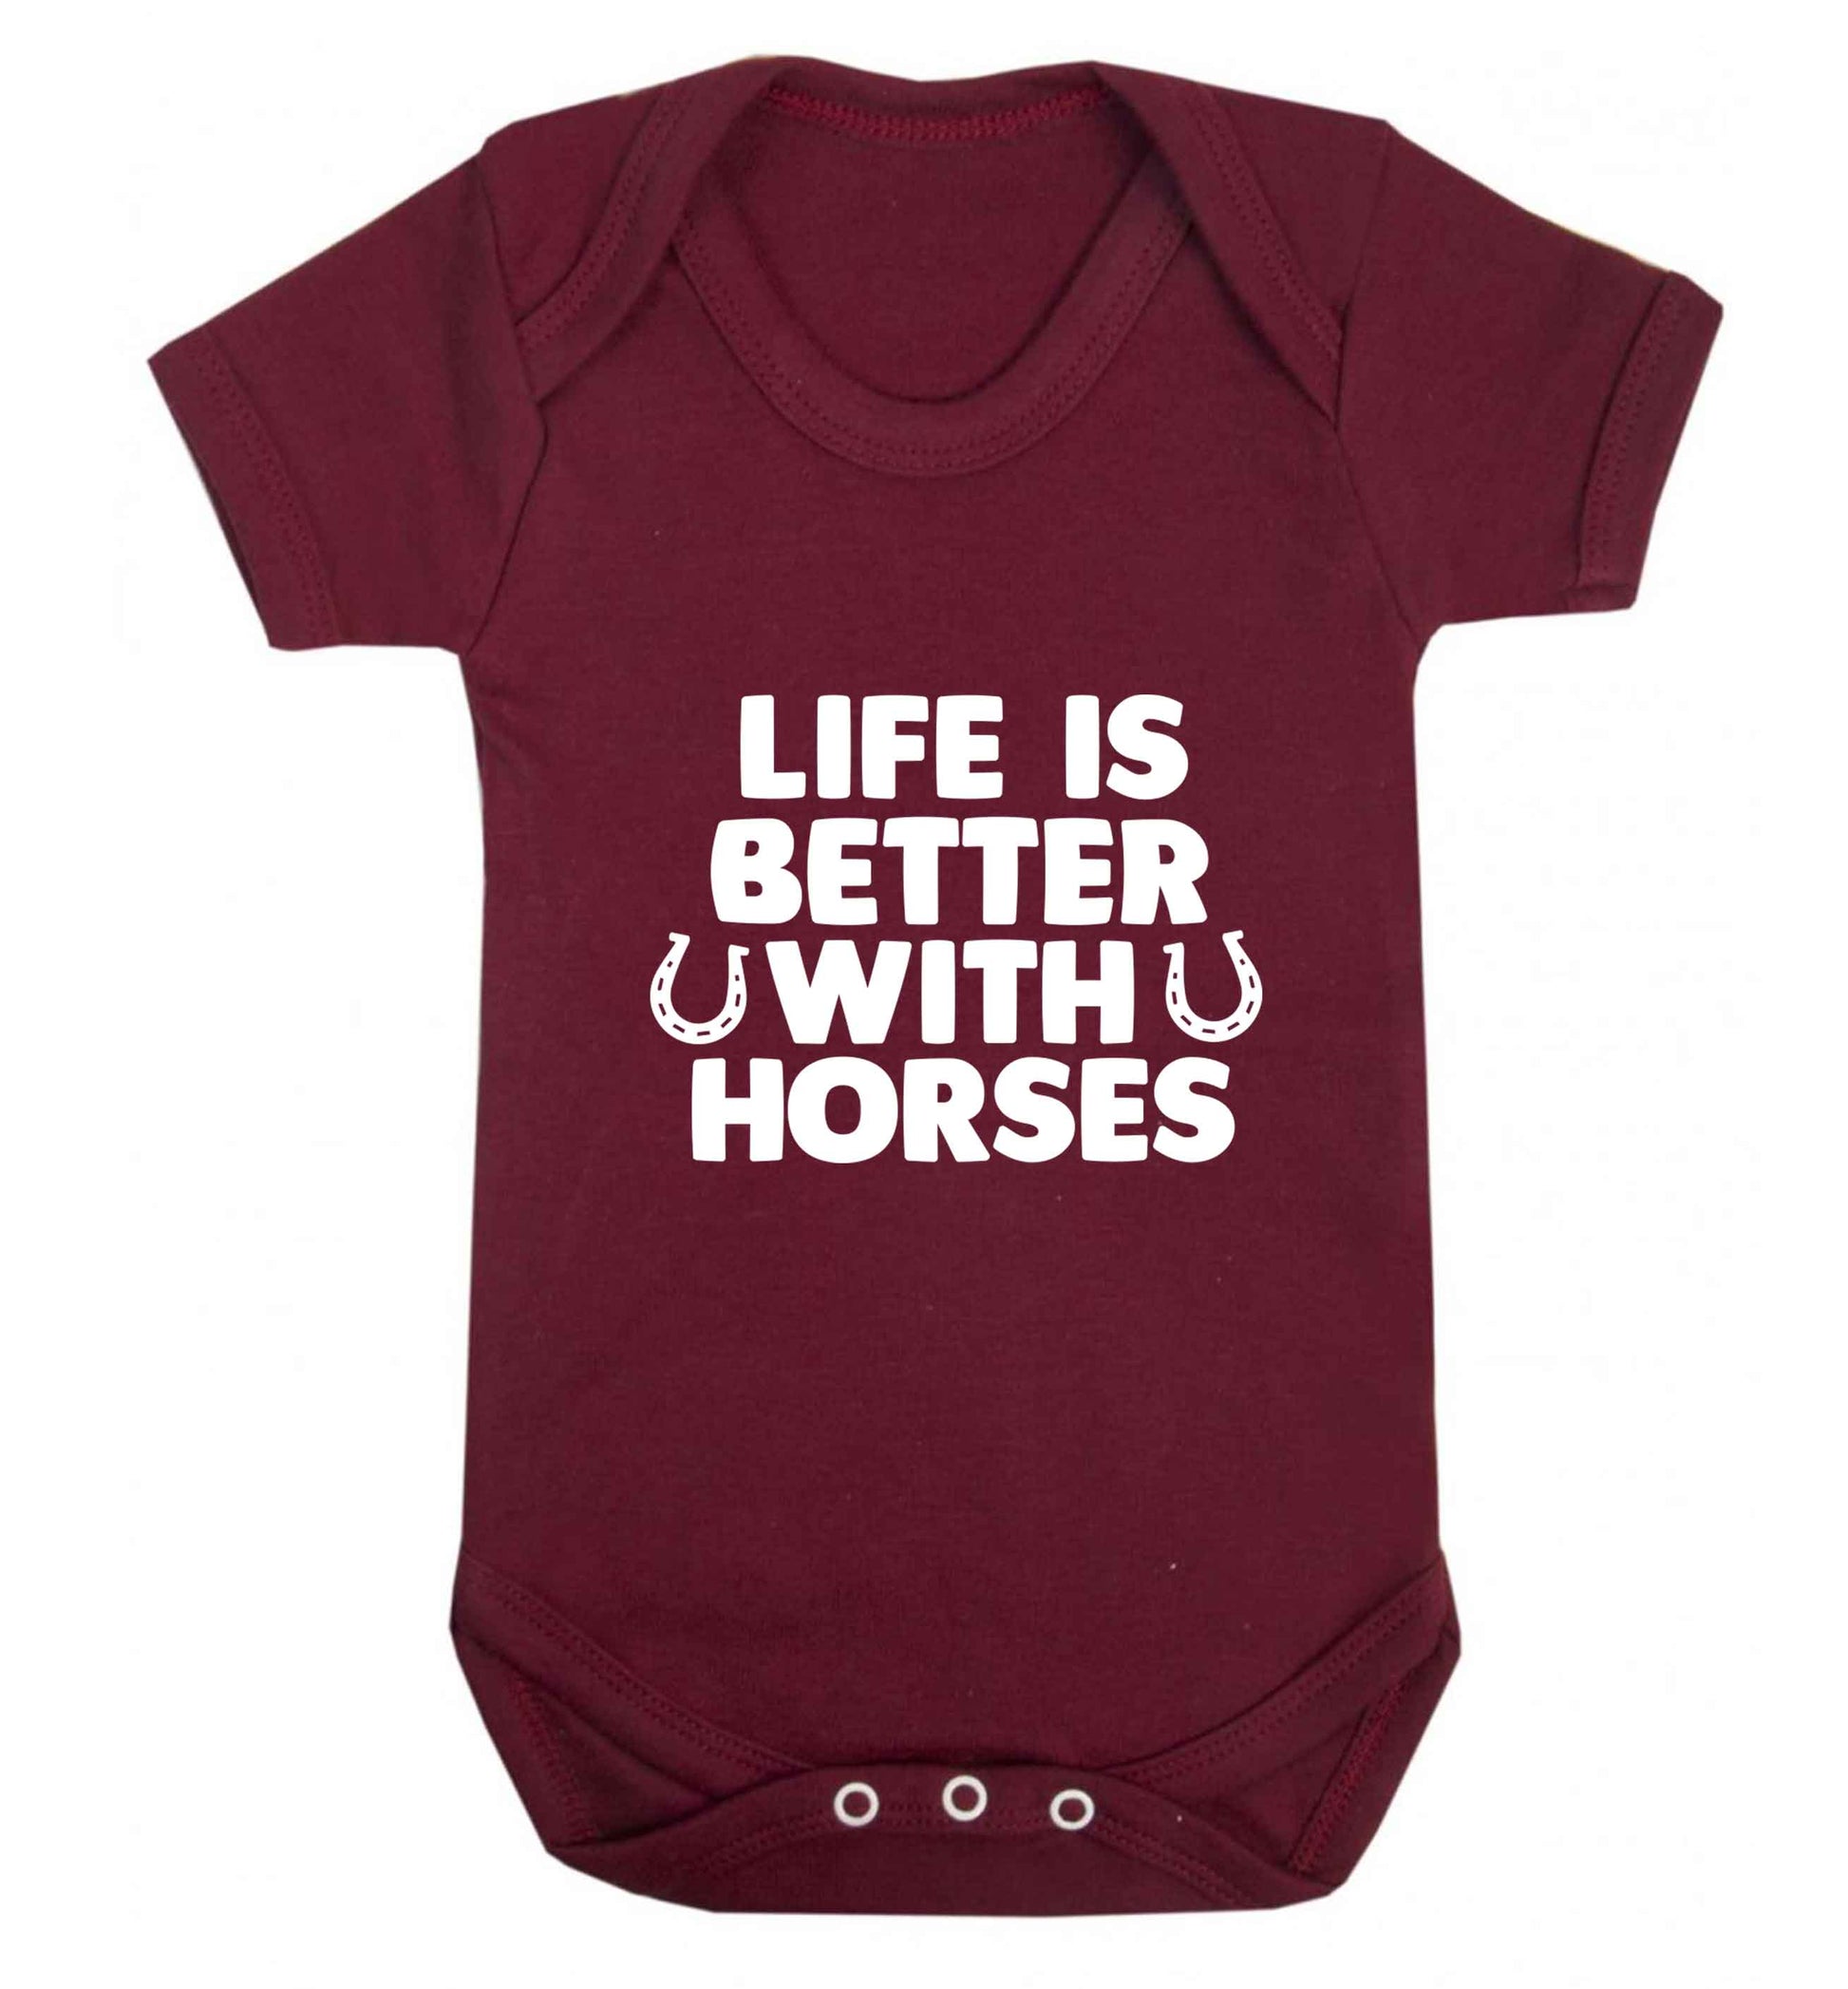 Life is better with horses baby vest maroon 18-24 months